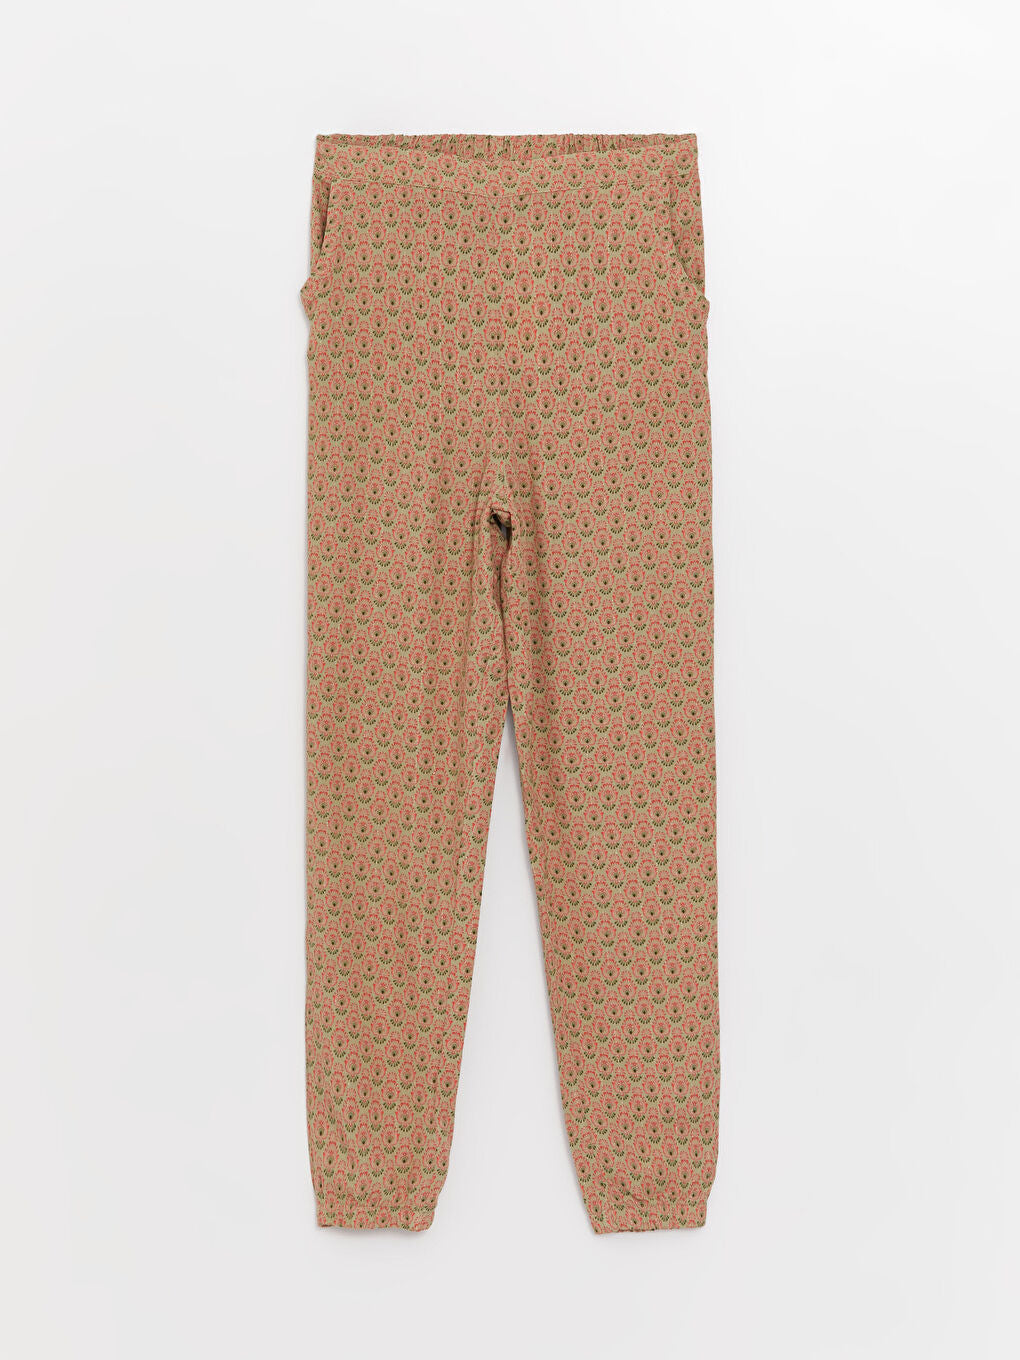 Elastic Waist Patterned Girls Trousers